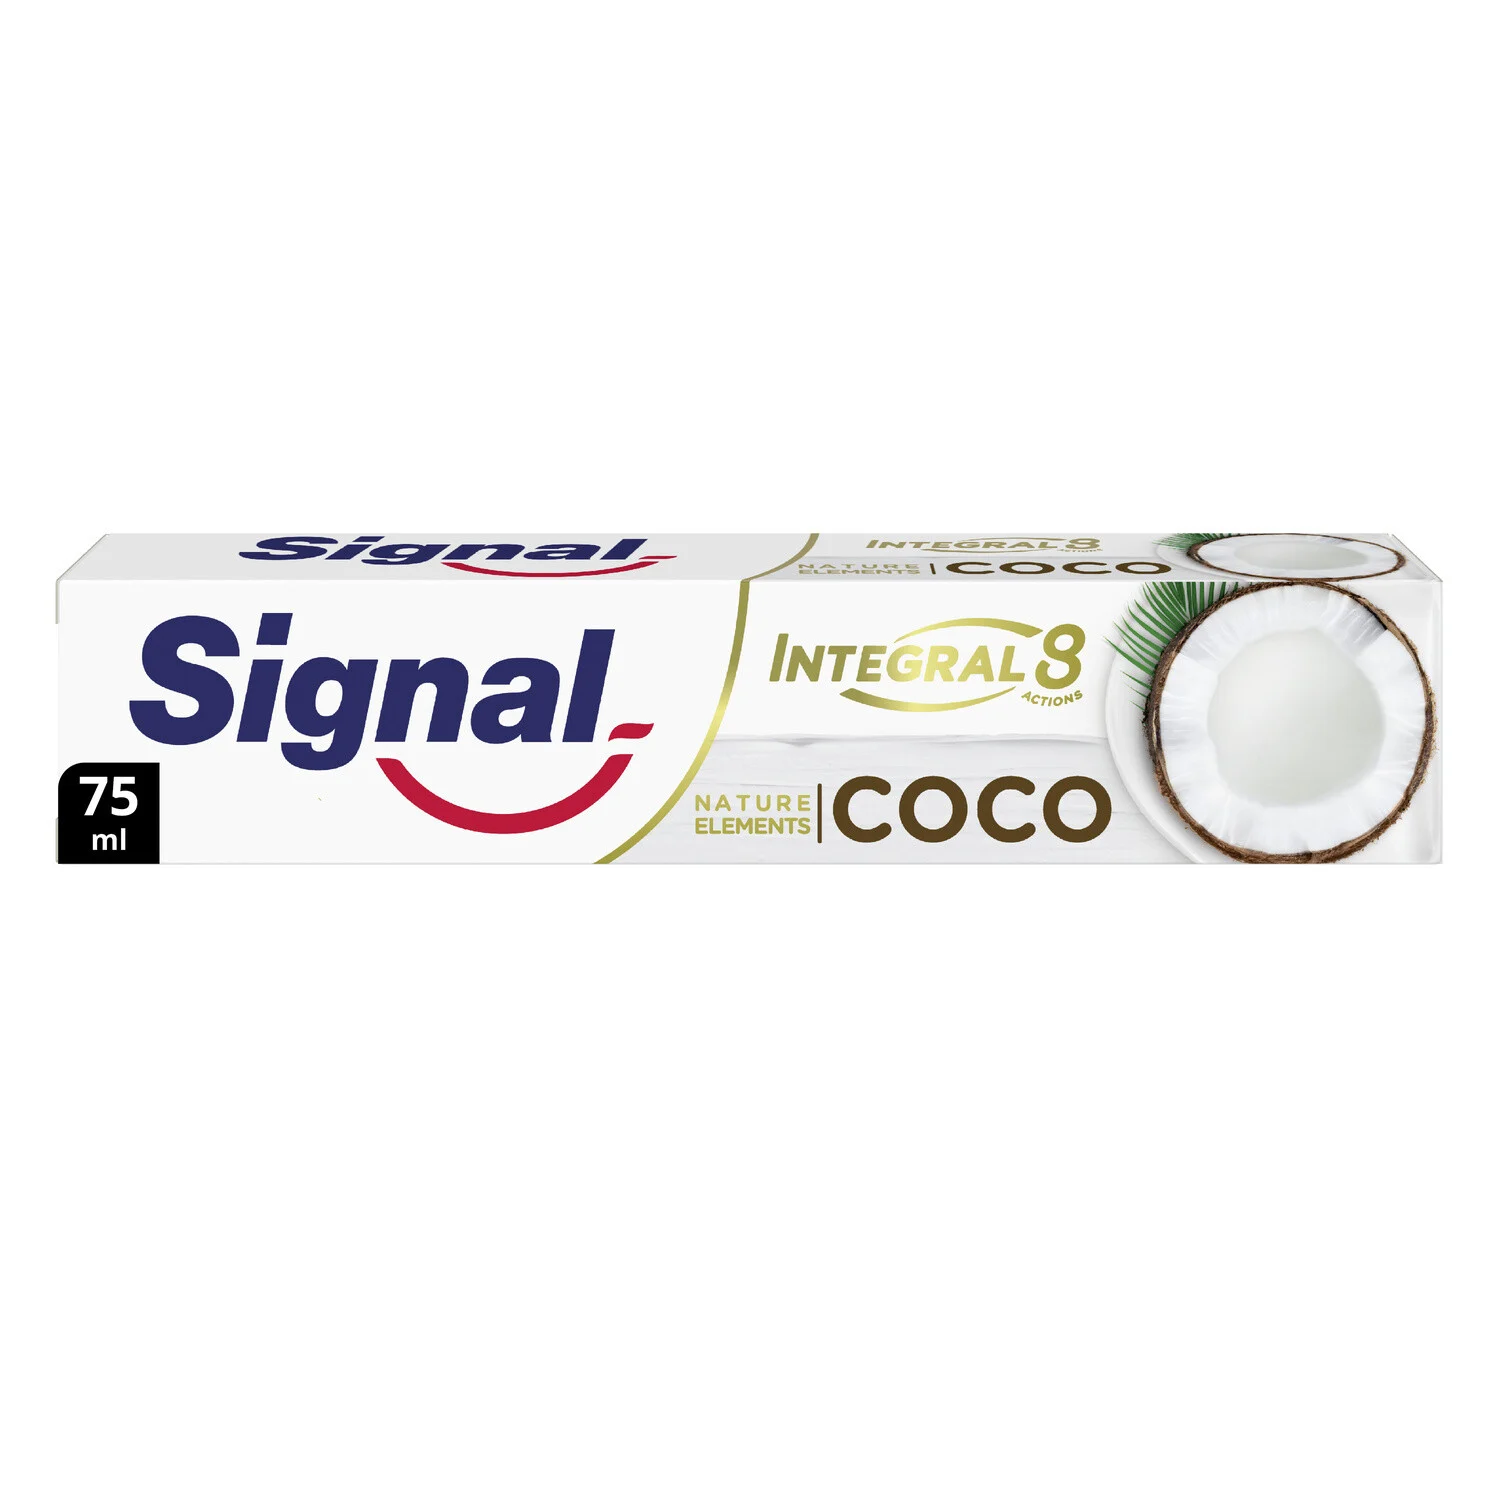 Dentrifrice Integral 8 Nature Elements Coco 75ml - Signal